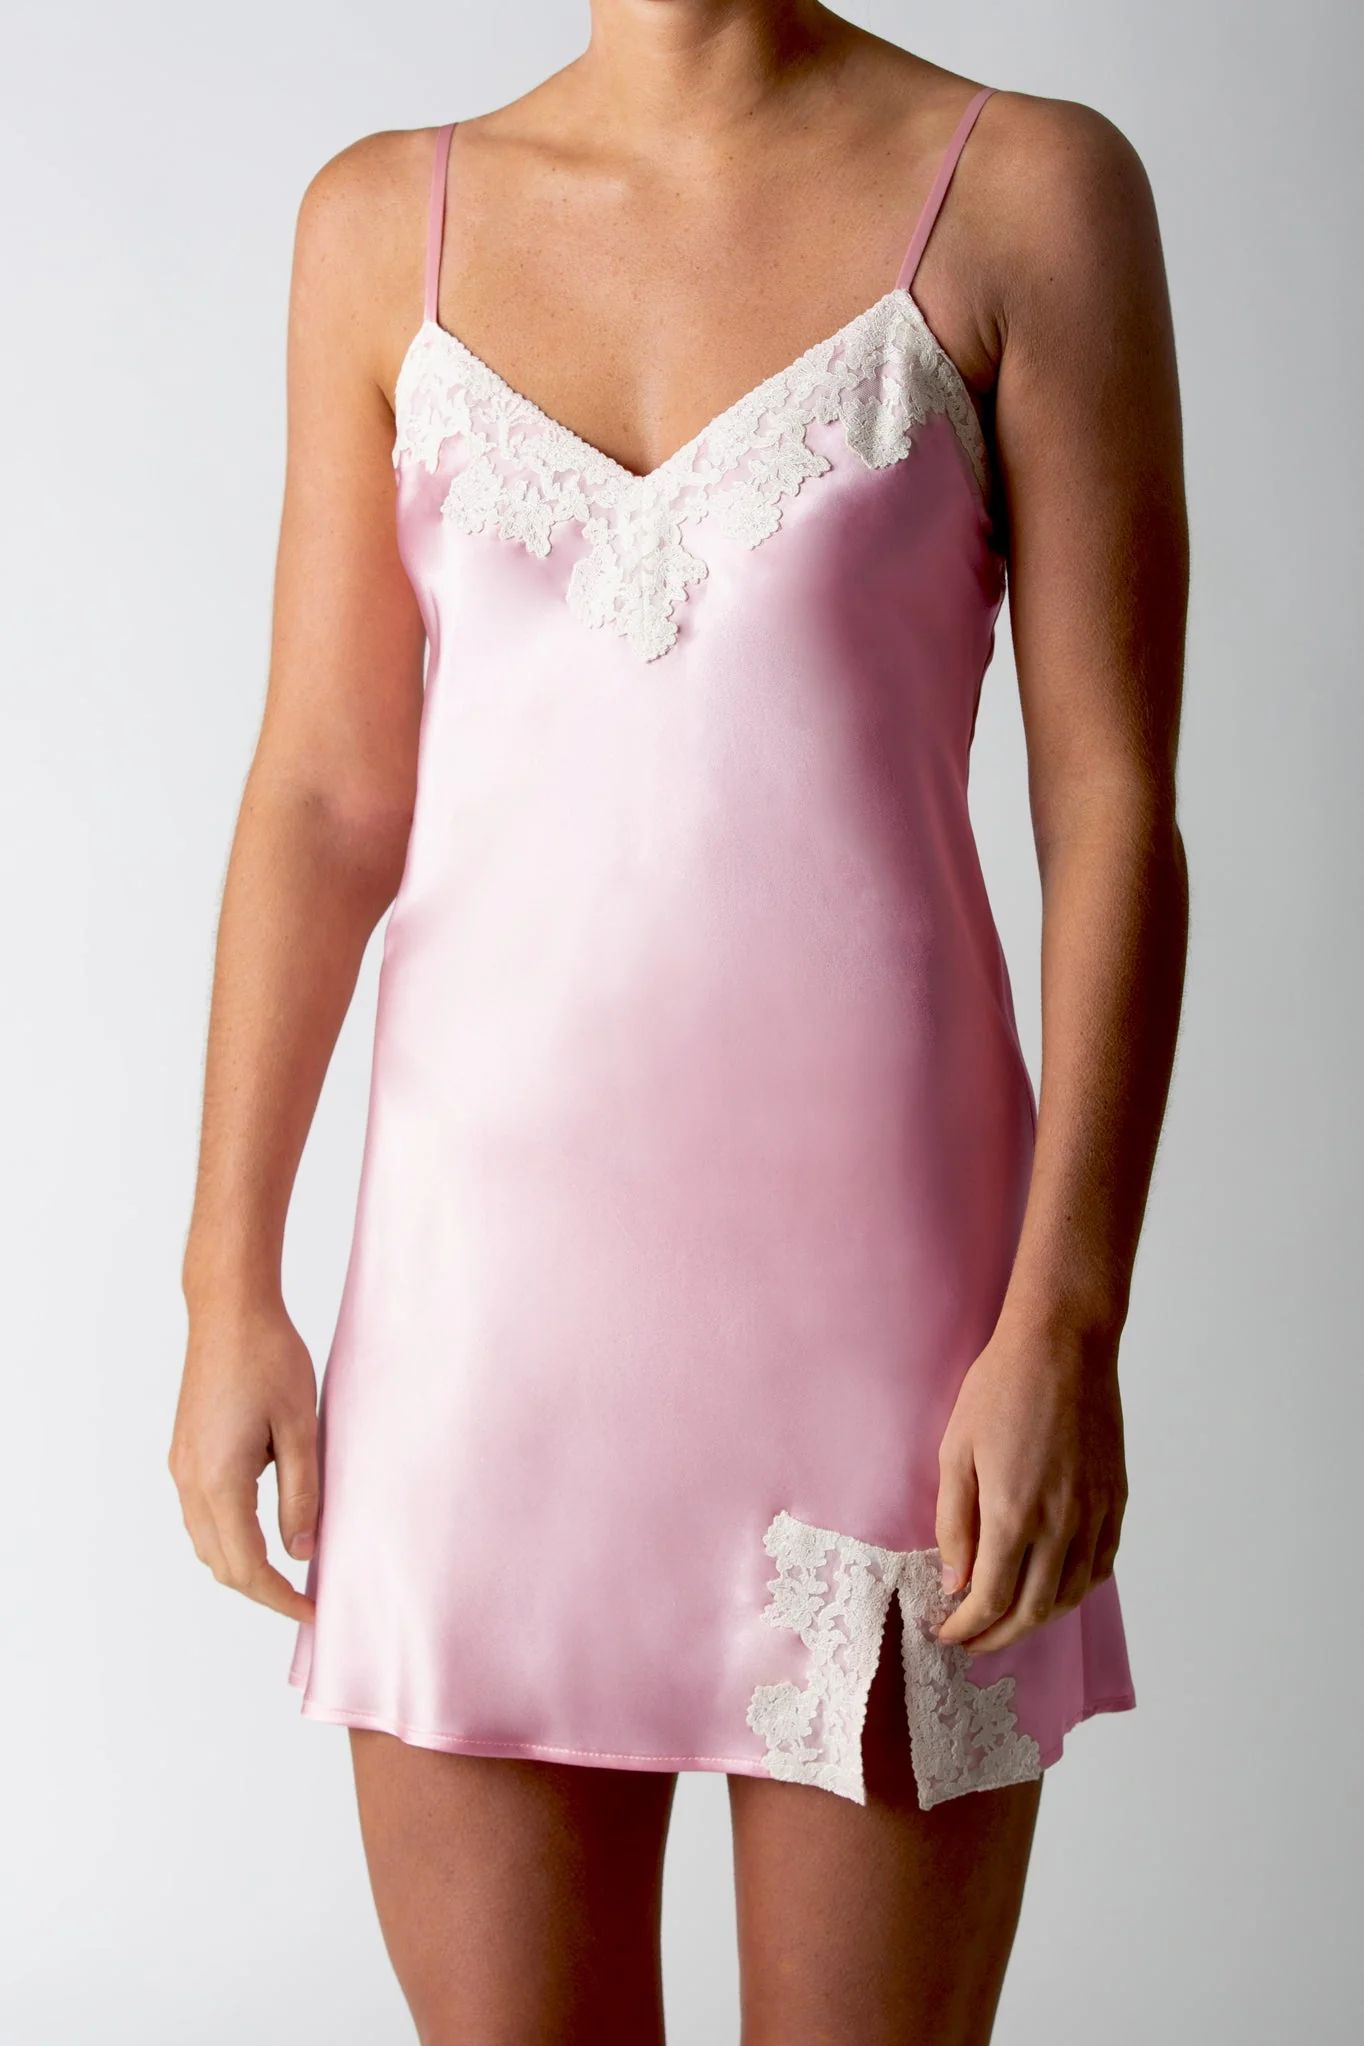 Claire Short Silk Nightgown - Bubblegum Pink by Miguelina | Support HerStory